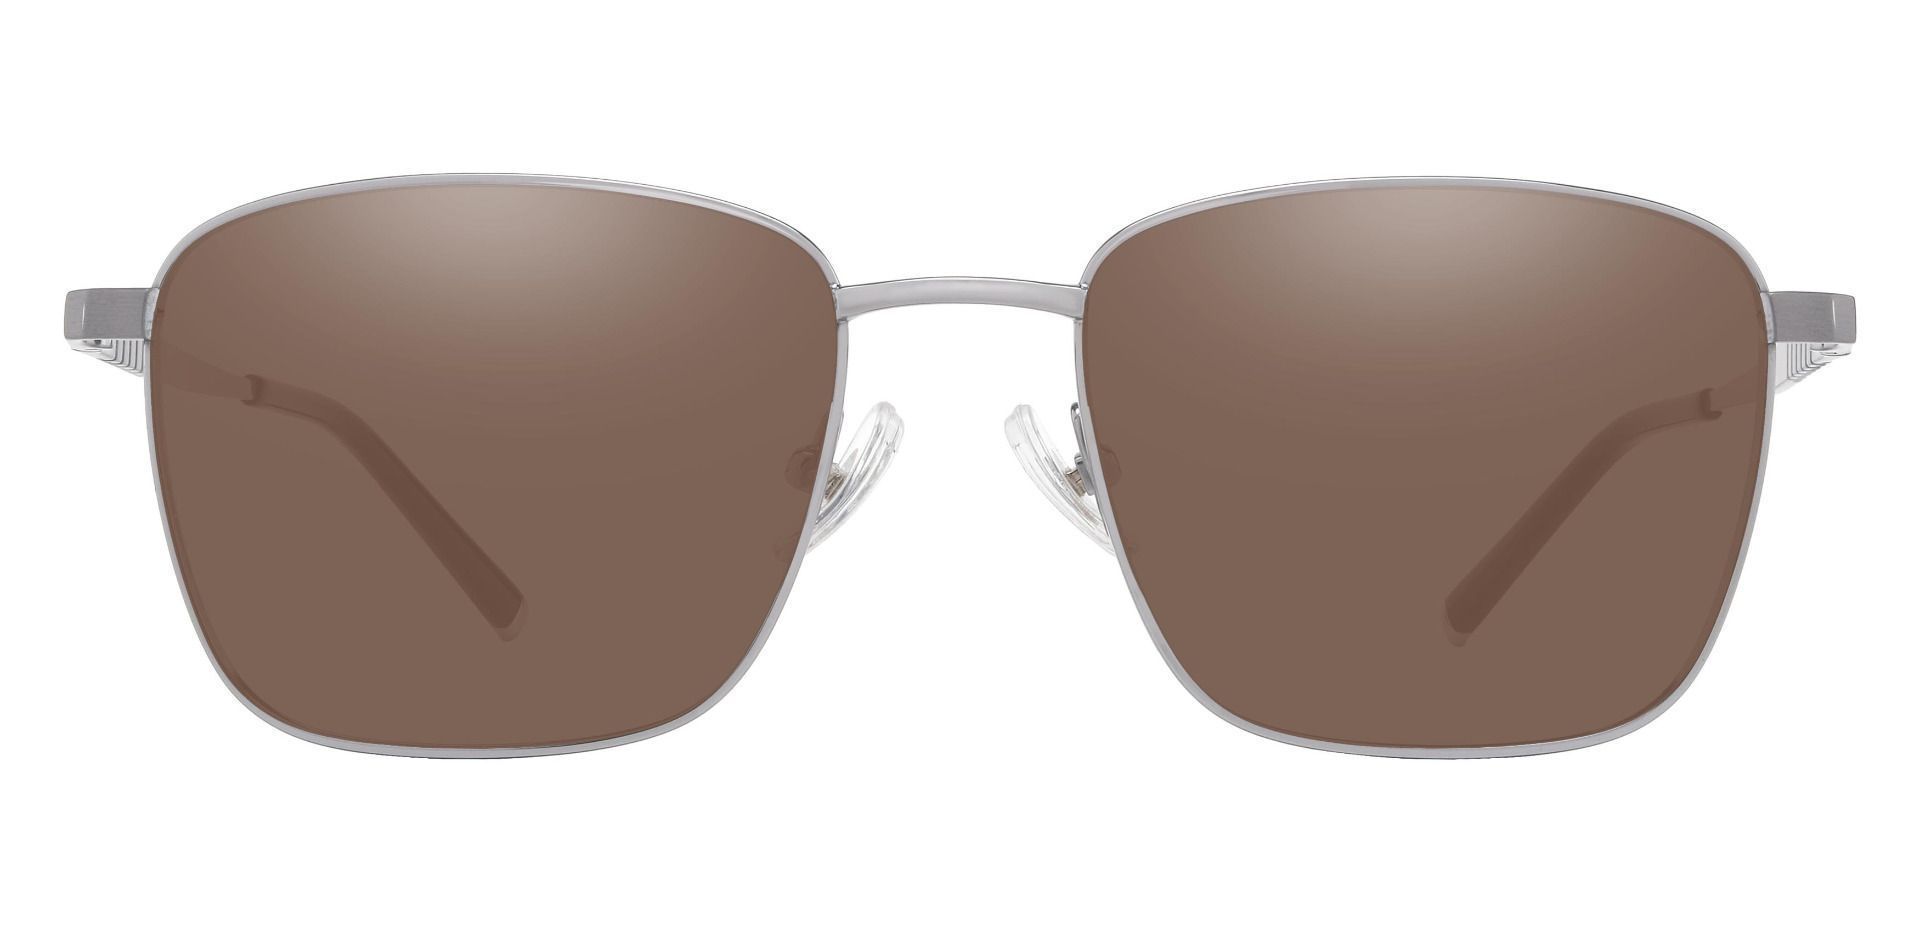 May Square Reading Sunglasses - Silver Frame With Brown Lenses